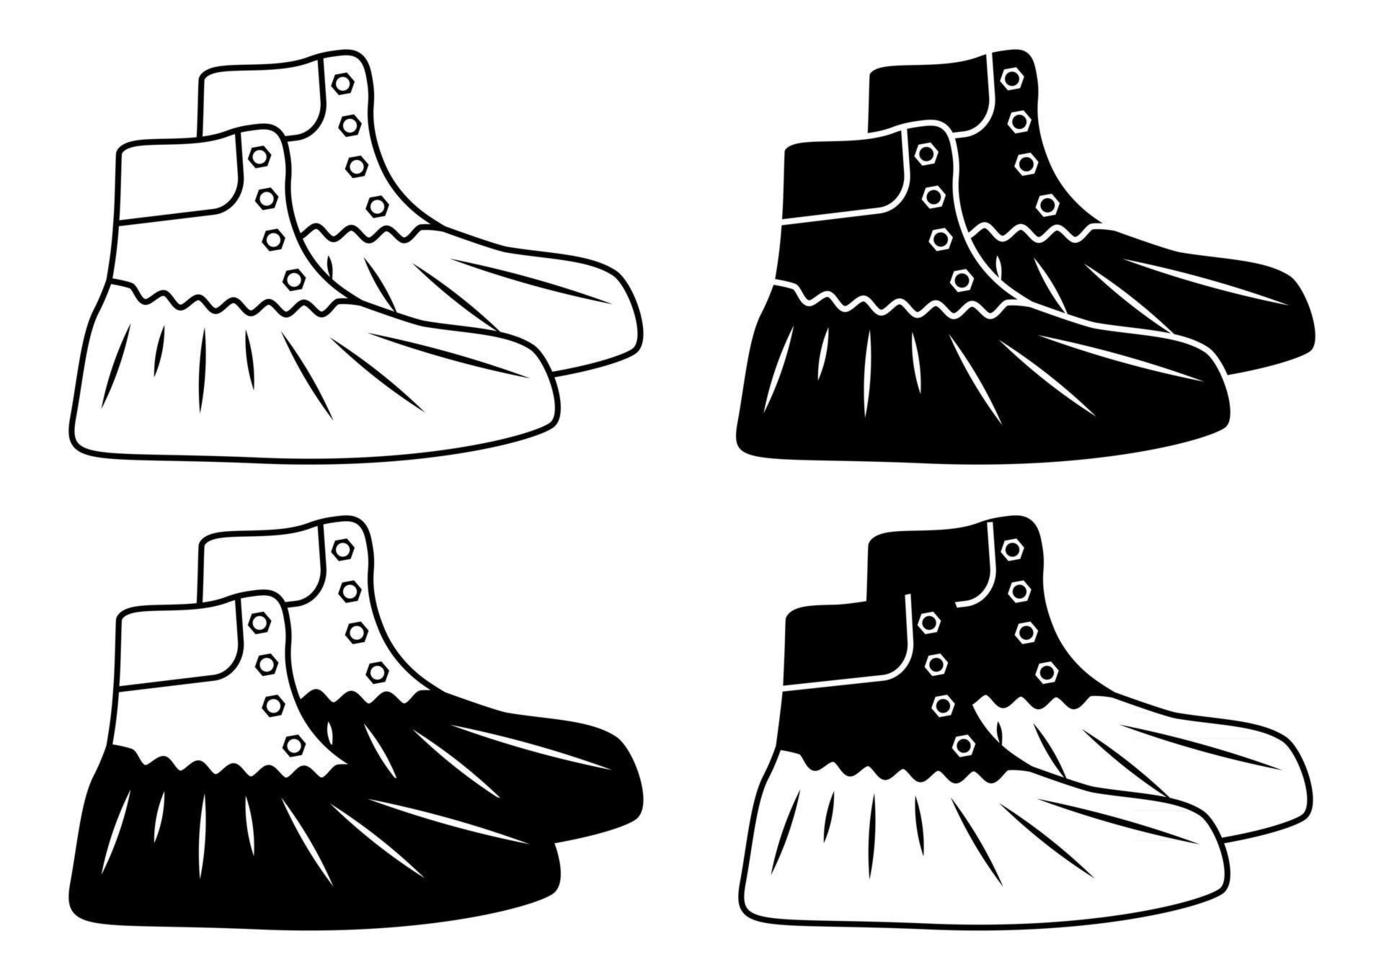 Polyethylene covering for shoes Antibacterial plastic shoe covers vector